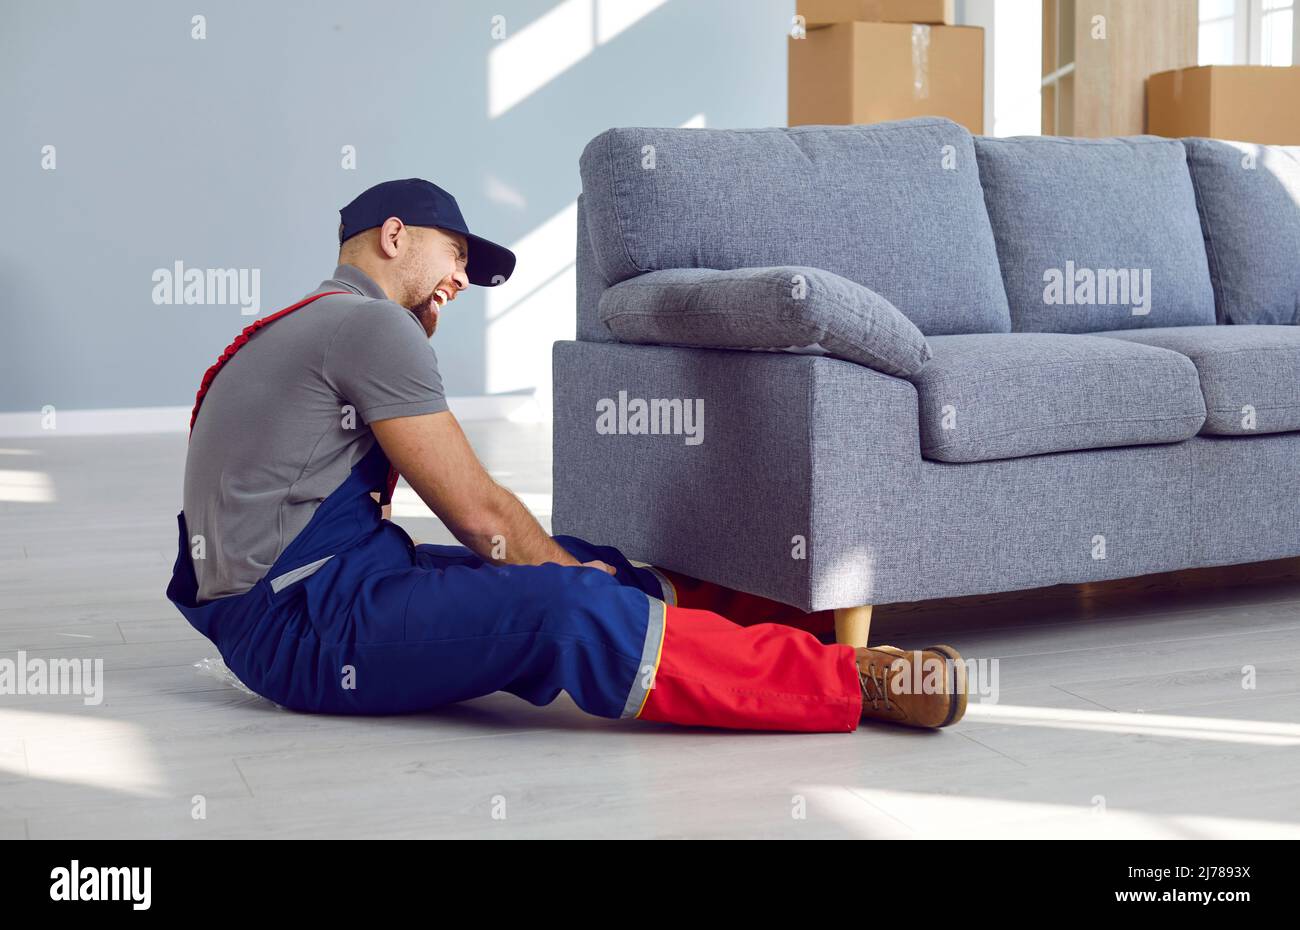 Delivery worker who lifts heavy furniture gets his foot pinned under heavy couch Stock Photo